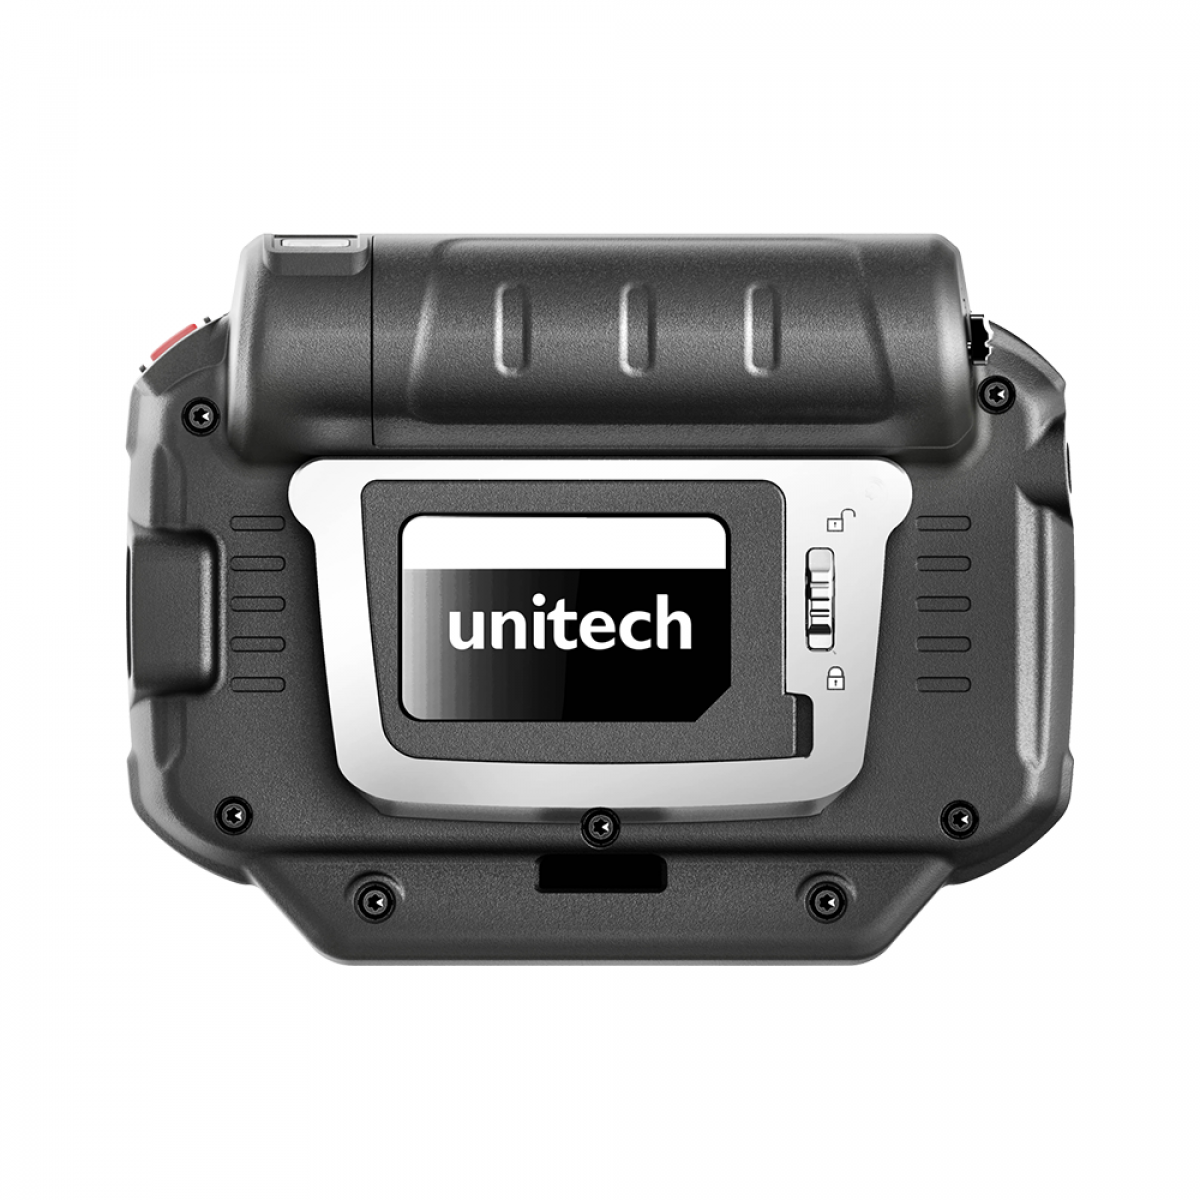 Unitech WD100 for smart hands-free data capture (back view)